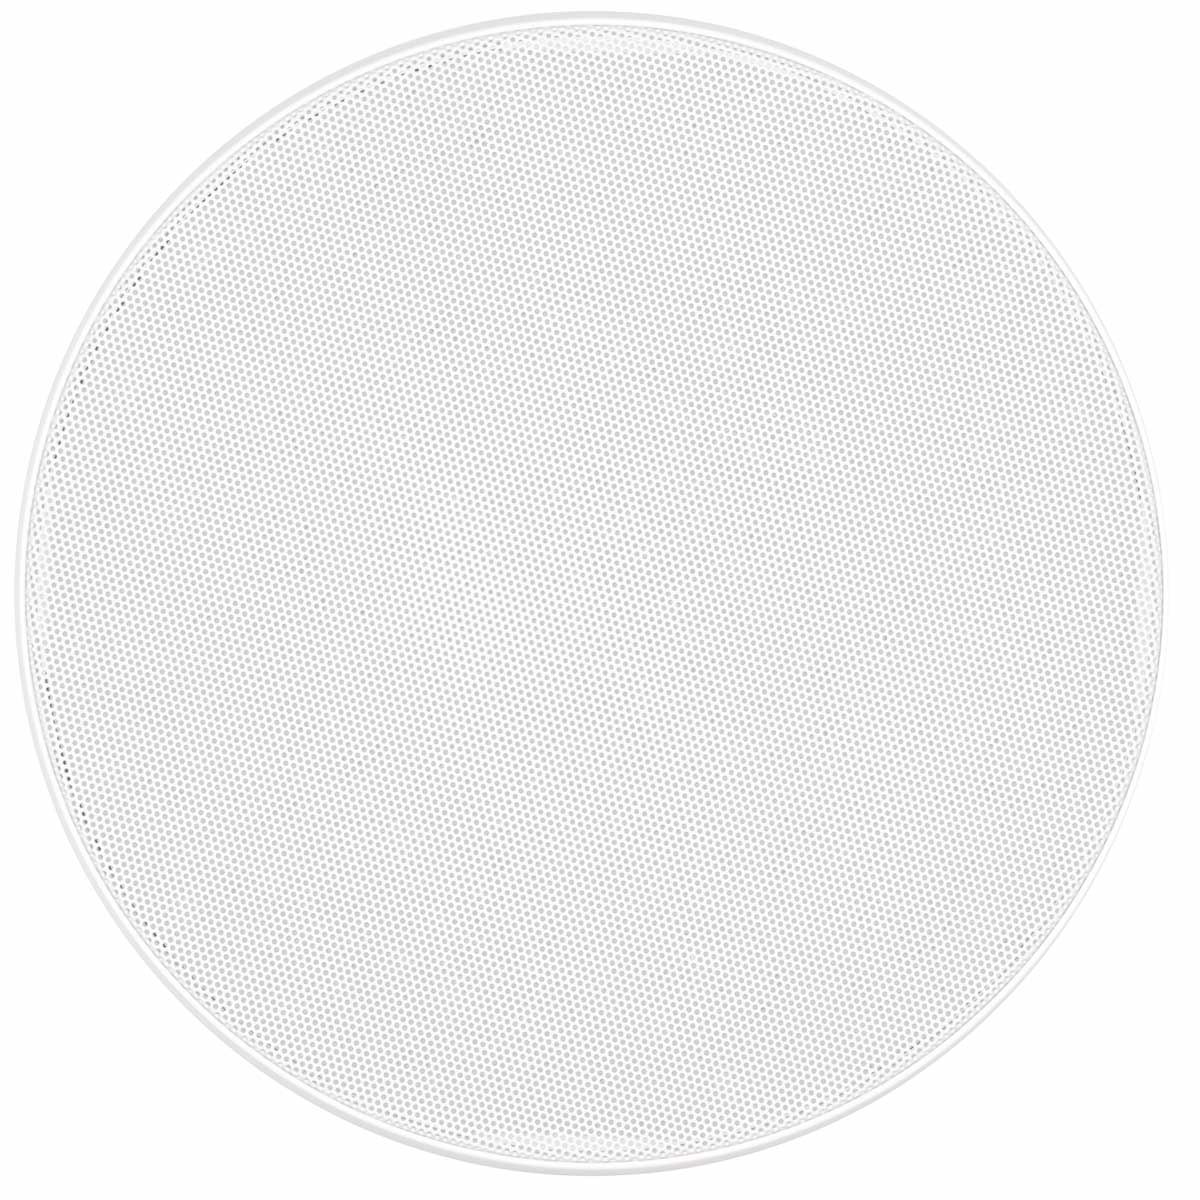 Monitor Audio Slim 180 In-Ceiling Speaker, front view with round grille